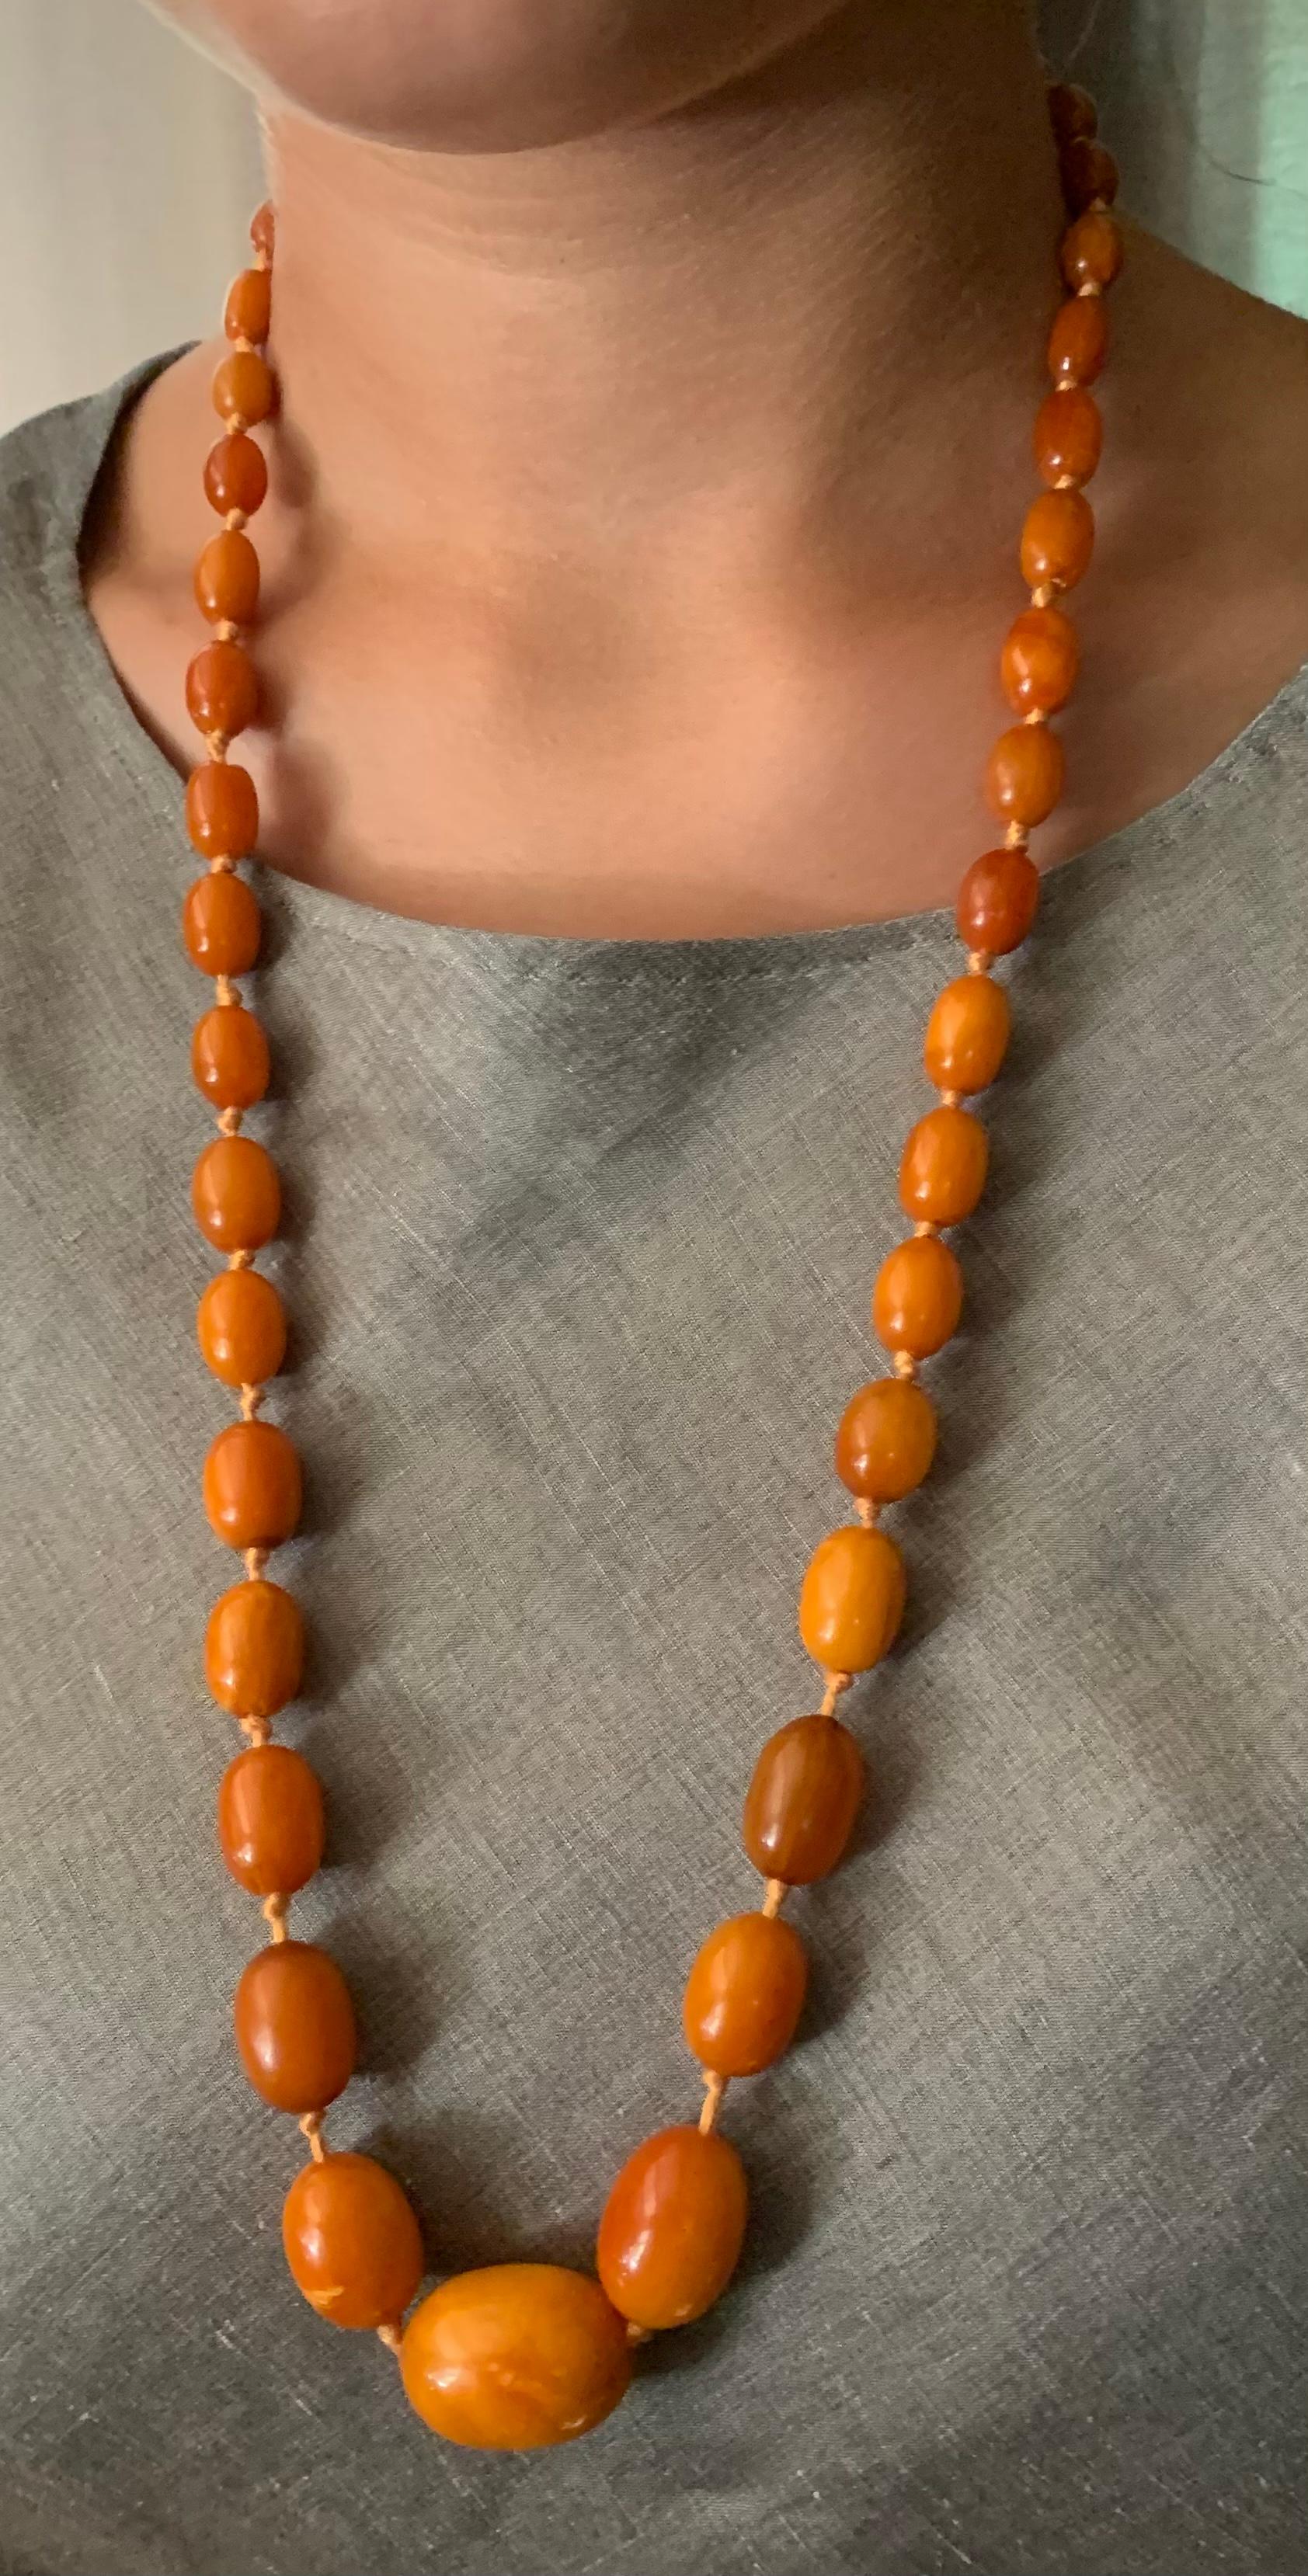 Comprised of forty two graduated oval natural amber beads ranging in size from 27mm to 7mm with nice patina, hand tied with later 14K gold clasp.
Amber is fossilized tree resin which has been prized as a gemstone since antiquity. It has been used as